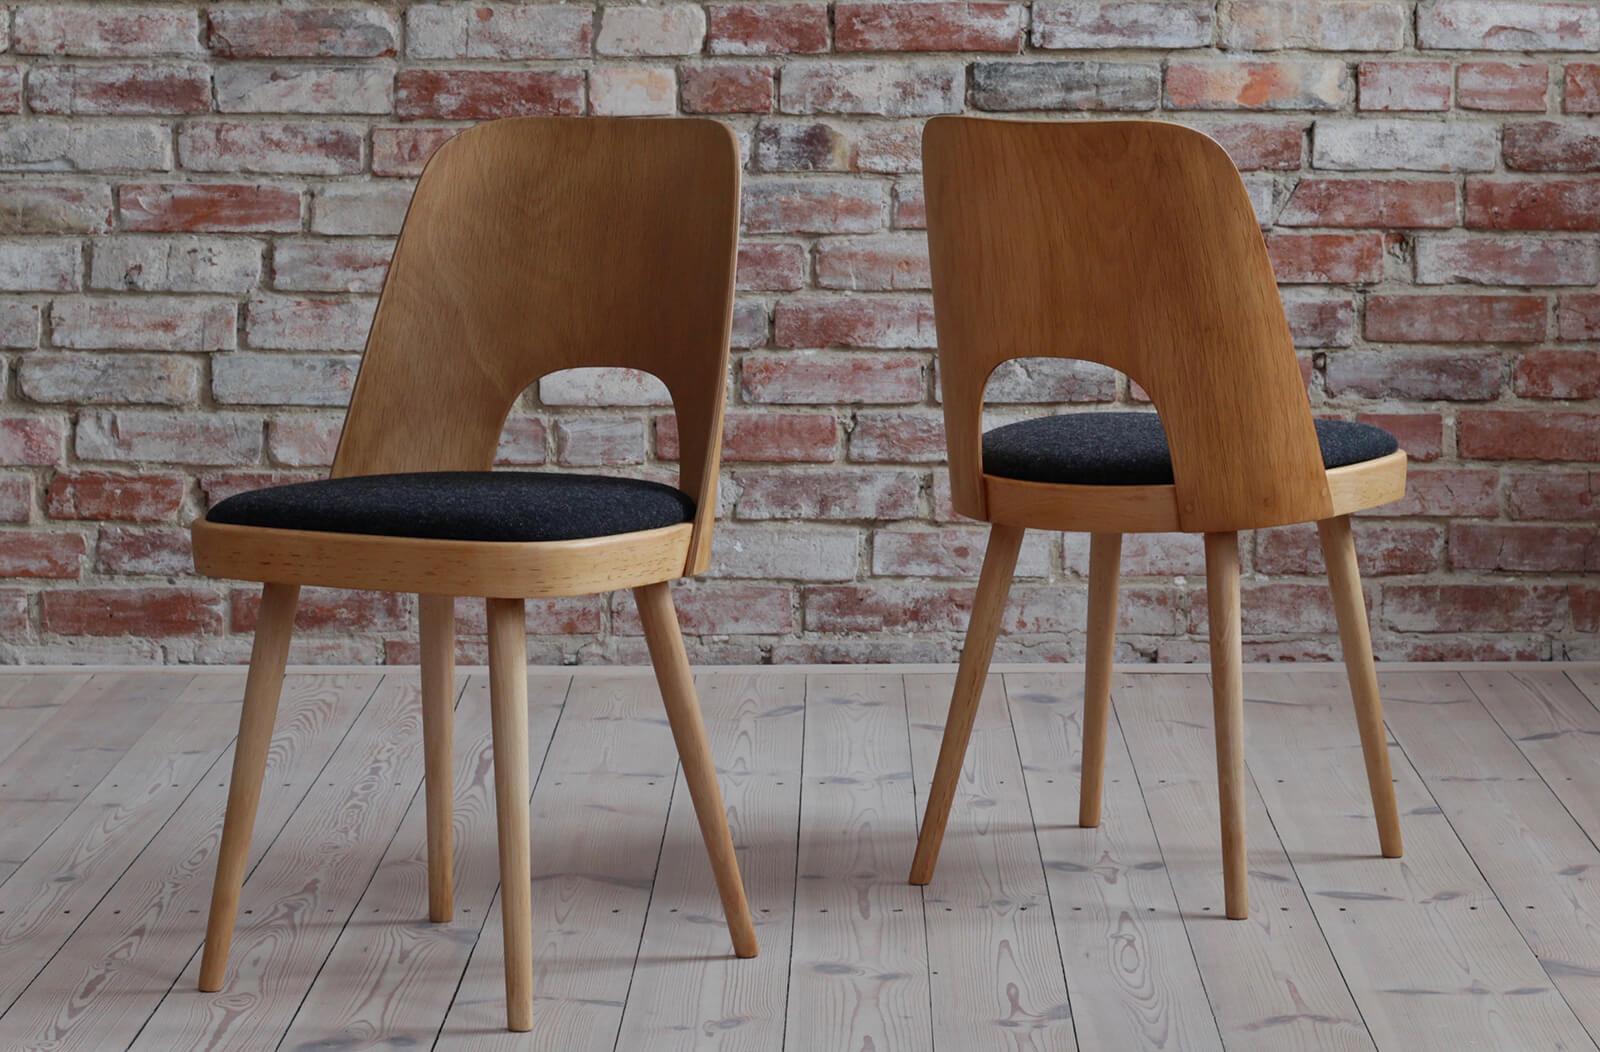 Set of 4 Dining Chairs by Oswald Haerdtl, Reupholstered, Midcentury In Good Condition For Sale In Wrocław, Poland